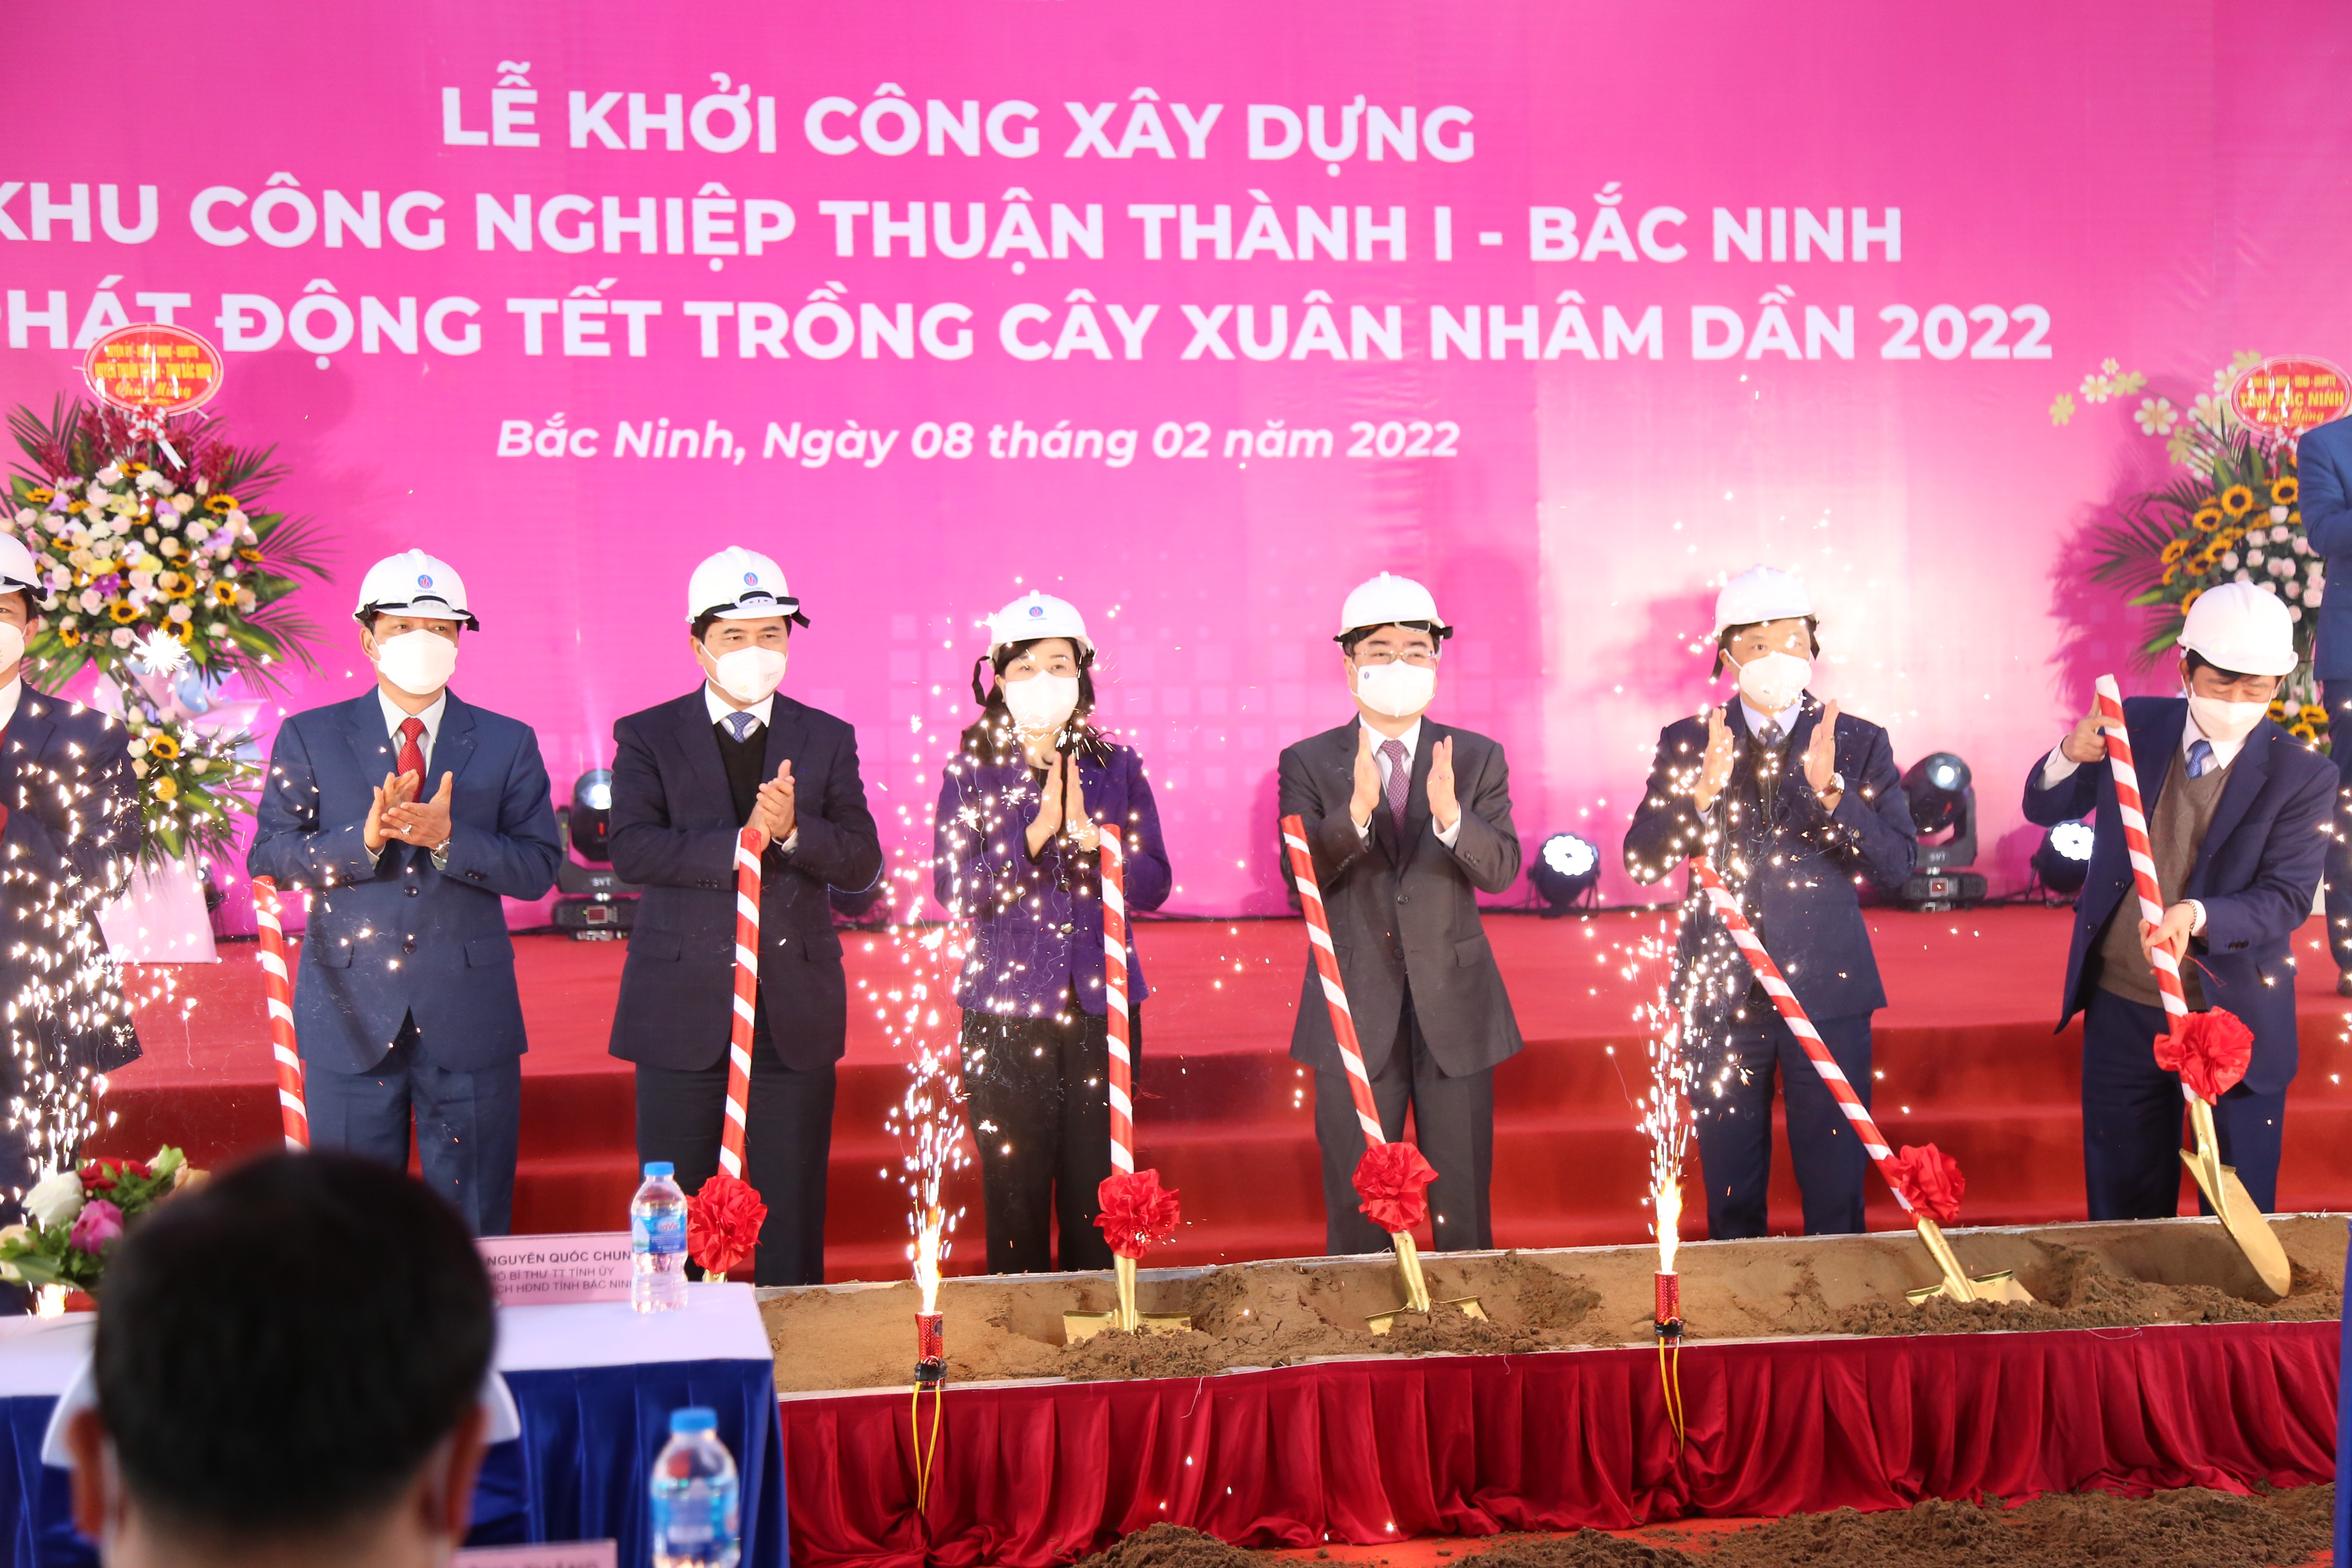 Viglacera "Begin the spring round of pleasures", started the project of Thuan Thanh I Industrial Park and the project of housing for workers in Yen Phong Industrial Park, Bac Ninh province